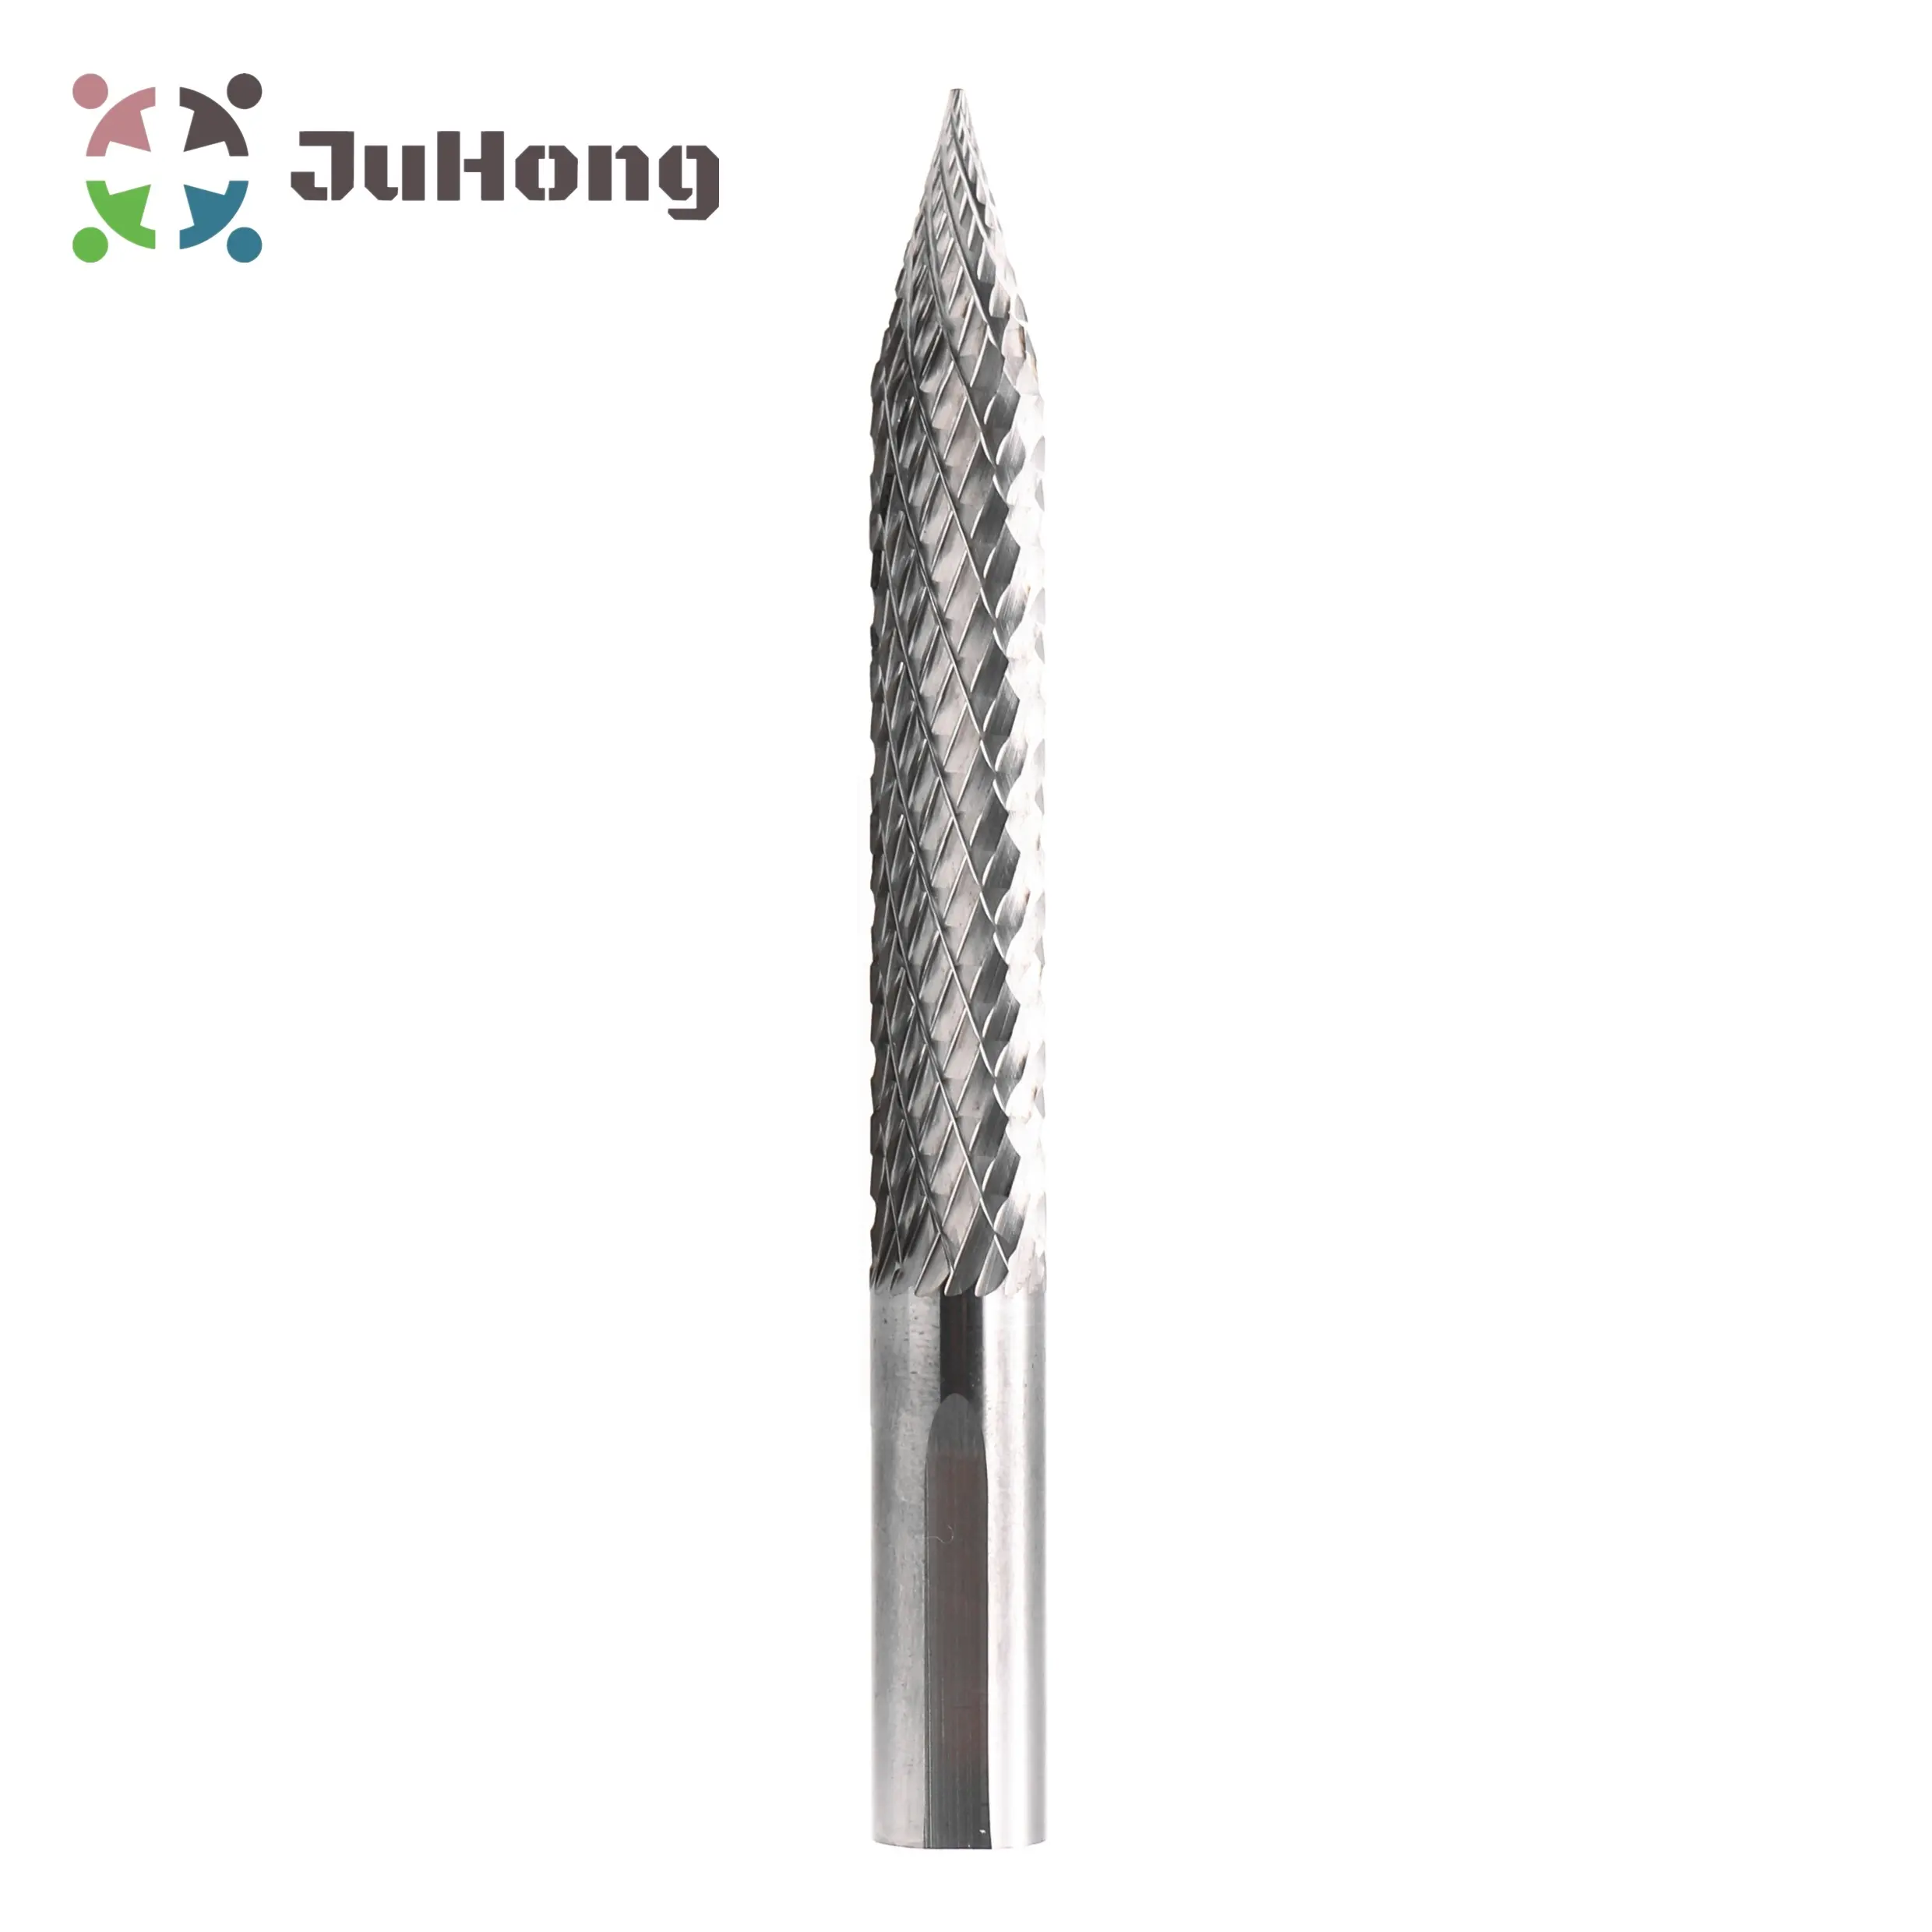 10mm (3/8") Super Hard Solid Carbide Cutter Rotary Burrs Carbon Steel Pneumatic Drill Bit Patch Plug Tire Injury Repair Tool